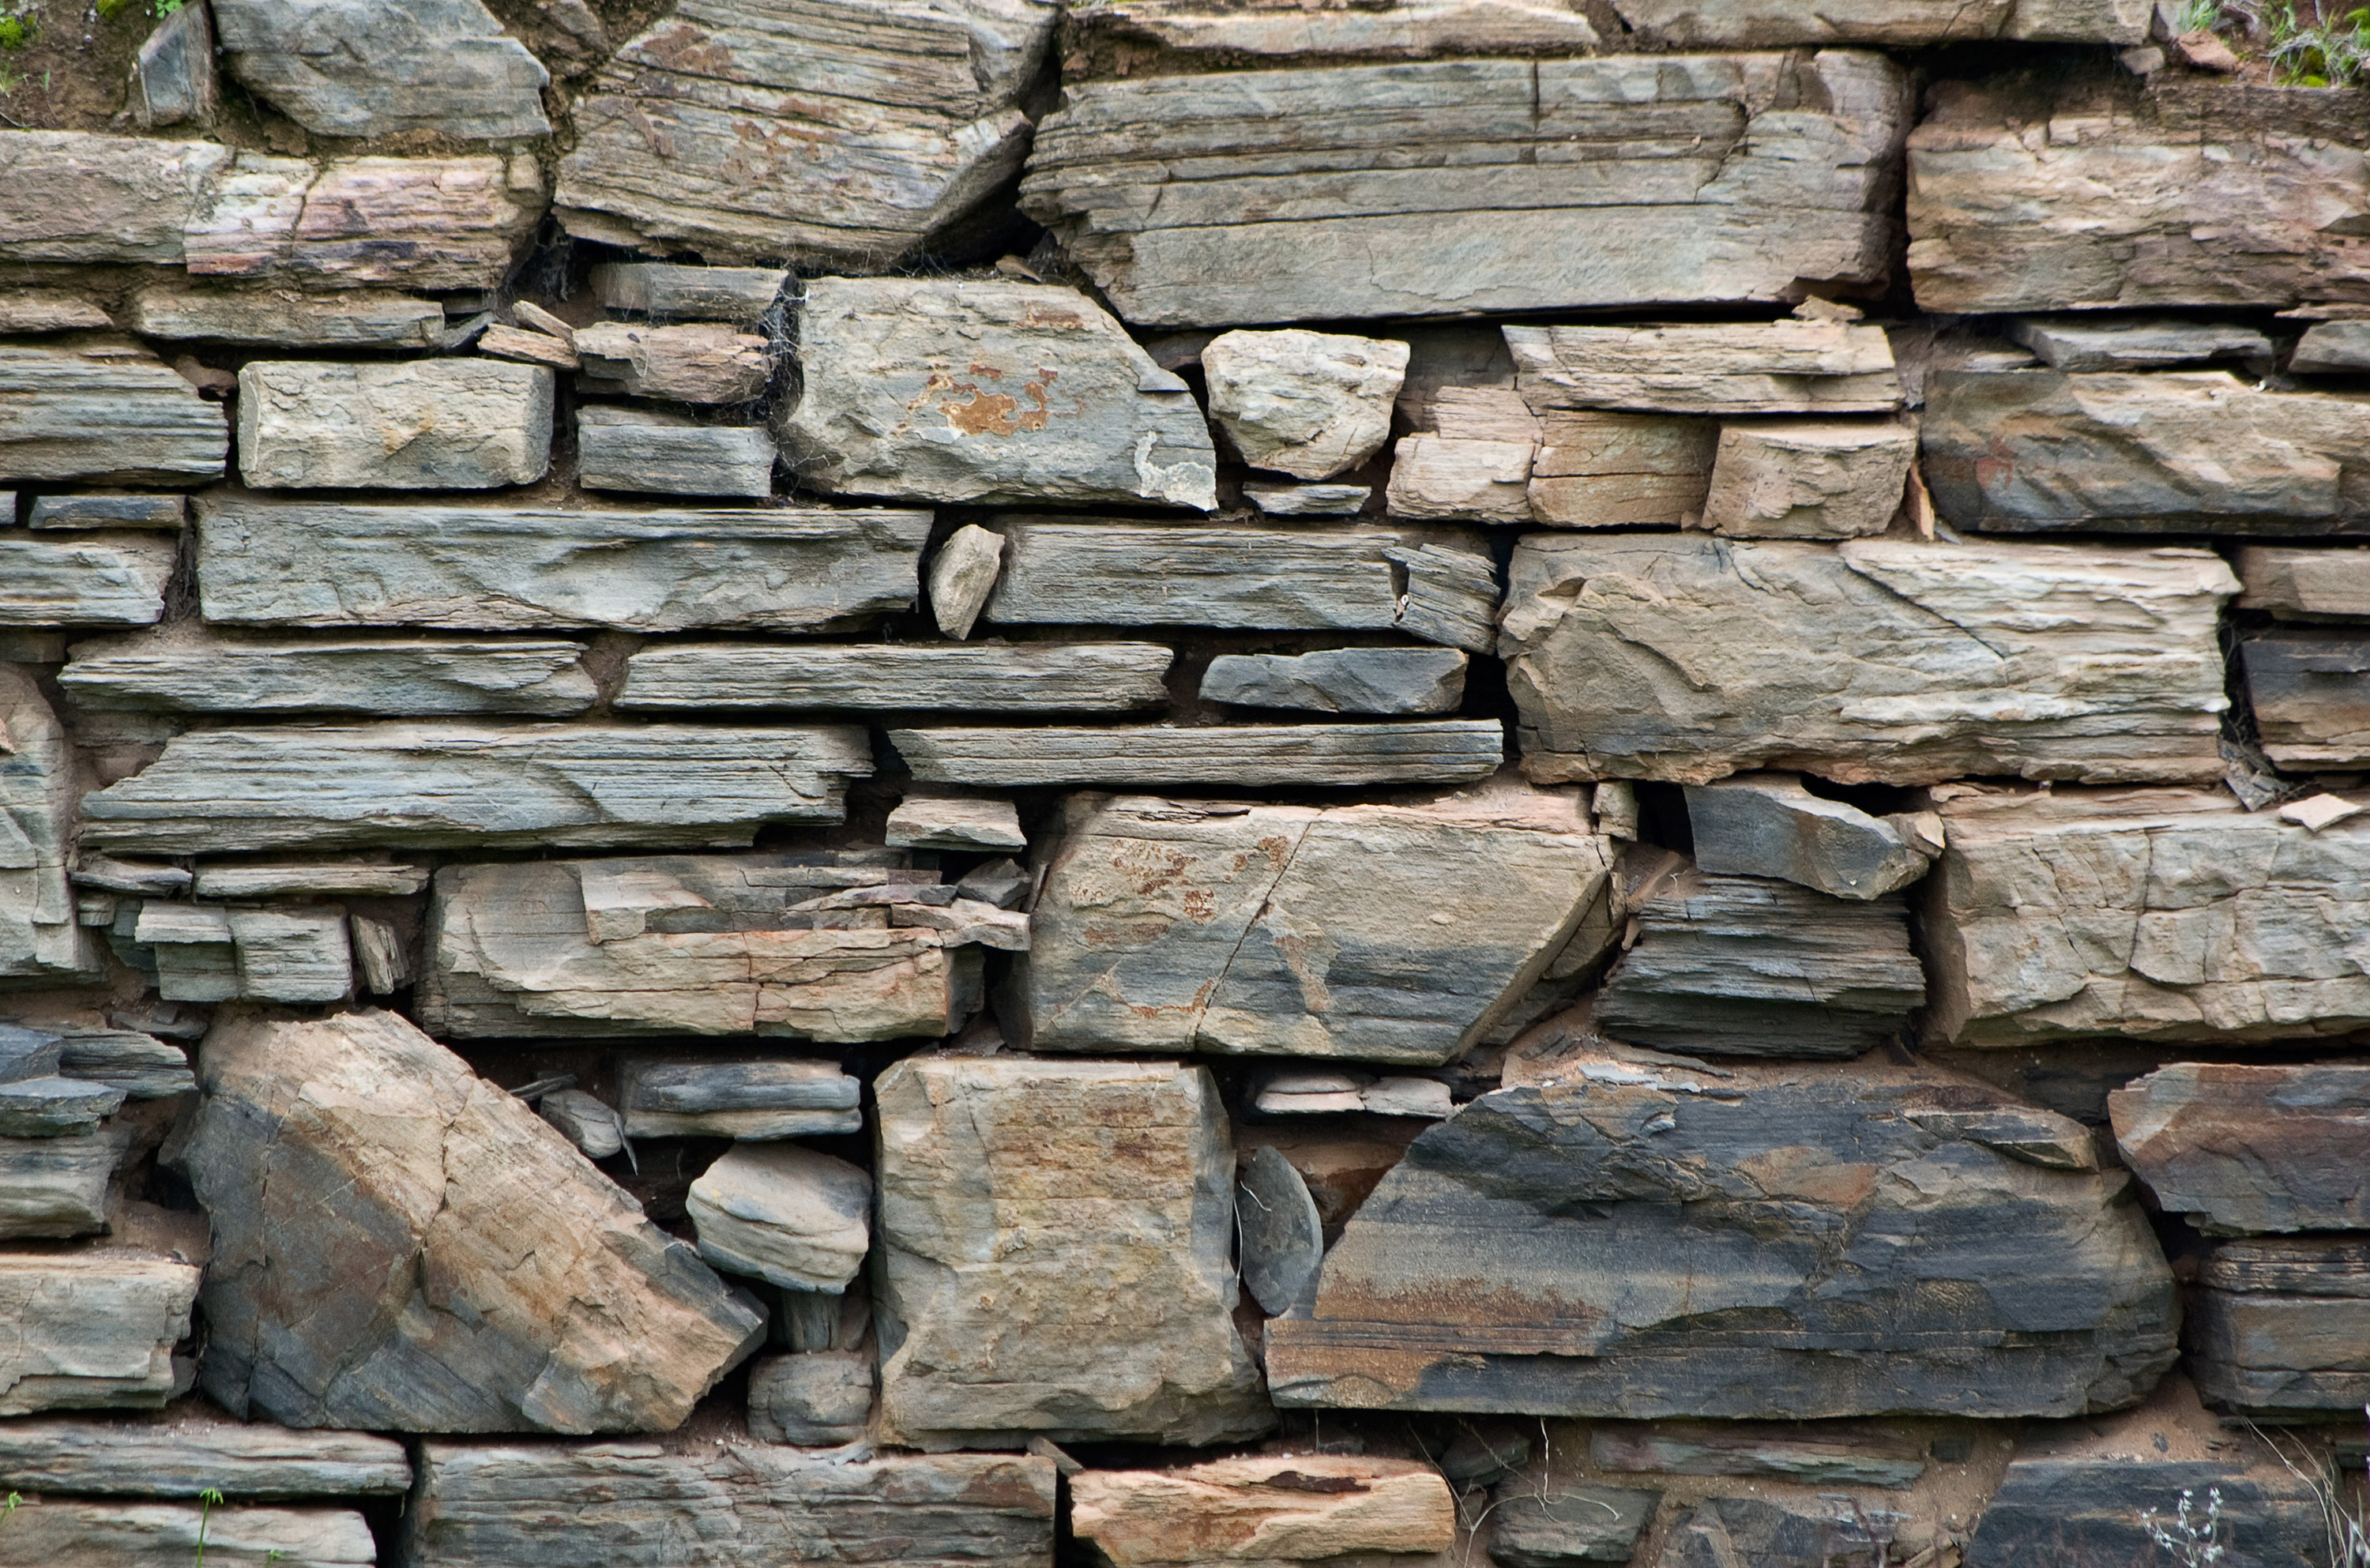 more old stone brick wall background texture photos | www